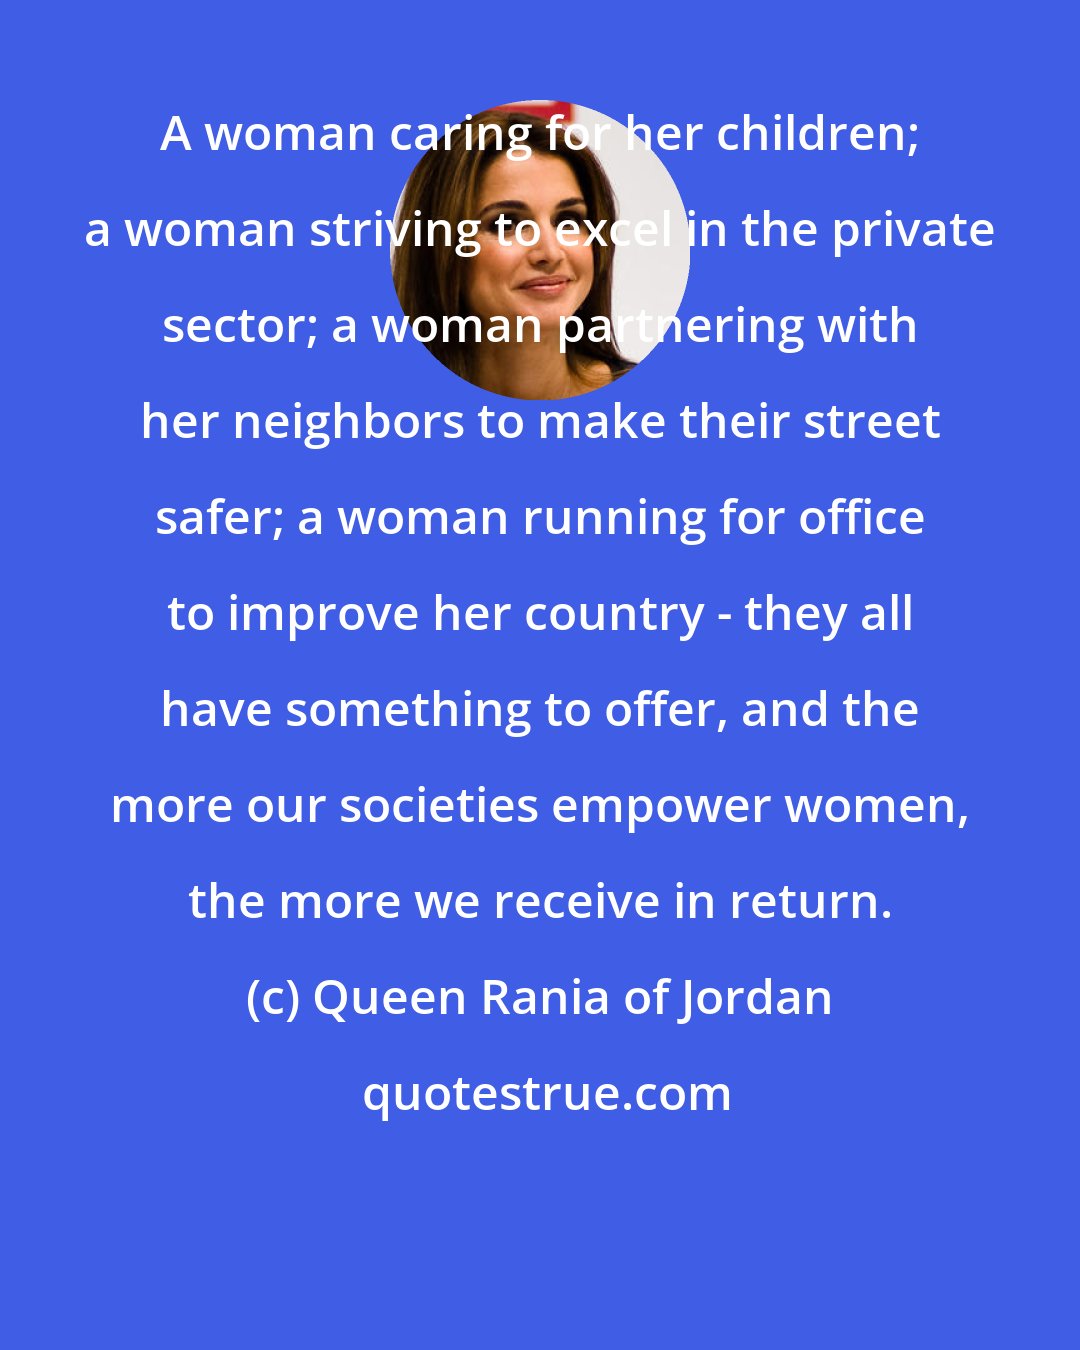 Queen Rania of Jordan: A woman caring for her children; a woman striving to excel in the private sector; a woman partnering with her neighbors to make their street safer; a woman running for office to improve her country - they all have something to offer, and the more our societies empower women, the more we receive in return.